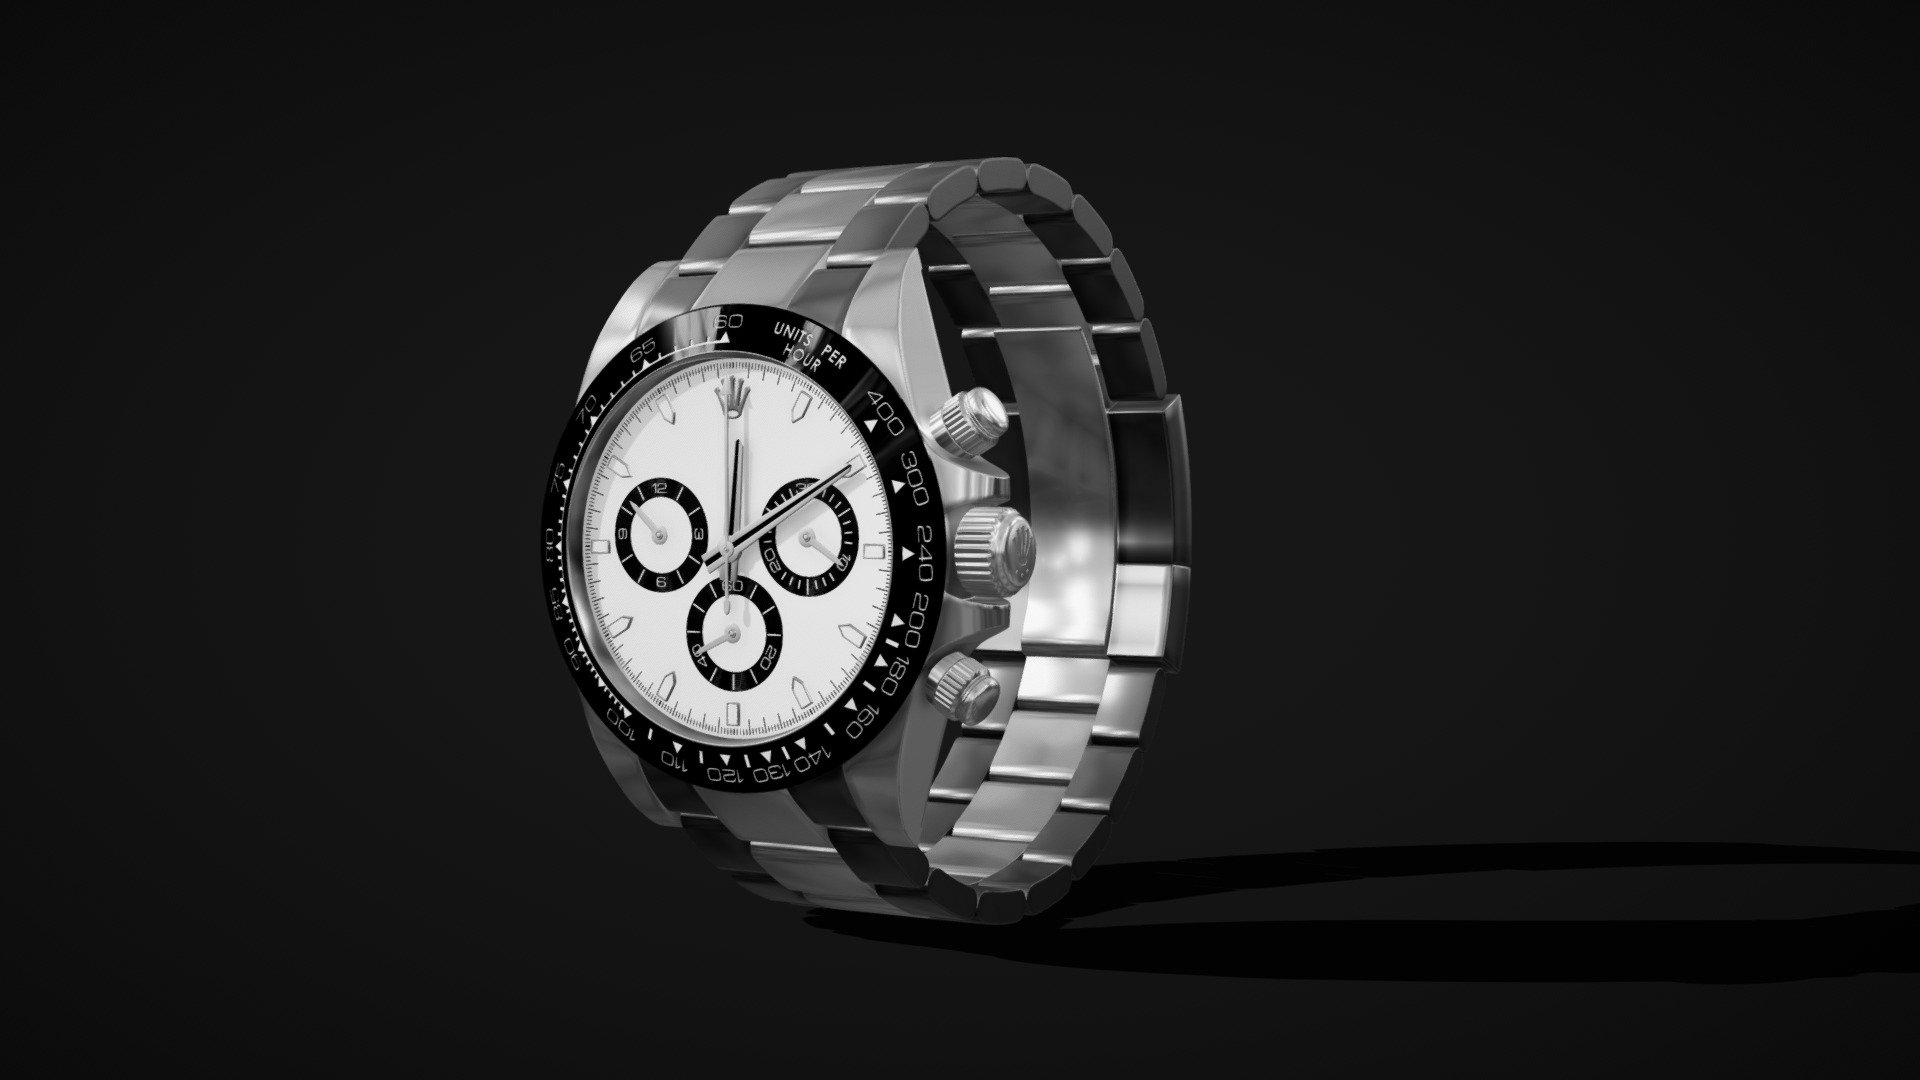 Its a 3D model of a watch
High poly 3d realistic model,
Rigged for all hands and buttons,
Animated second hand for a one minute loop 3d model